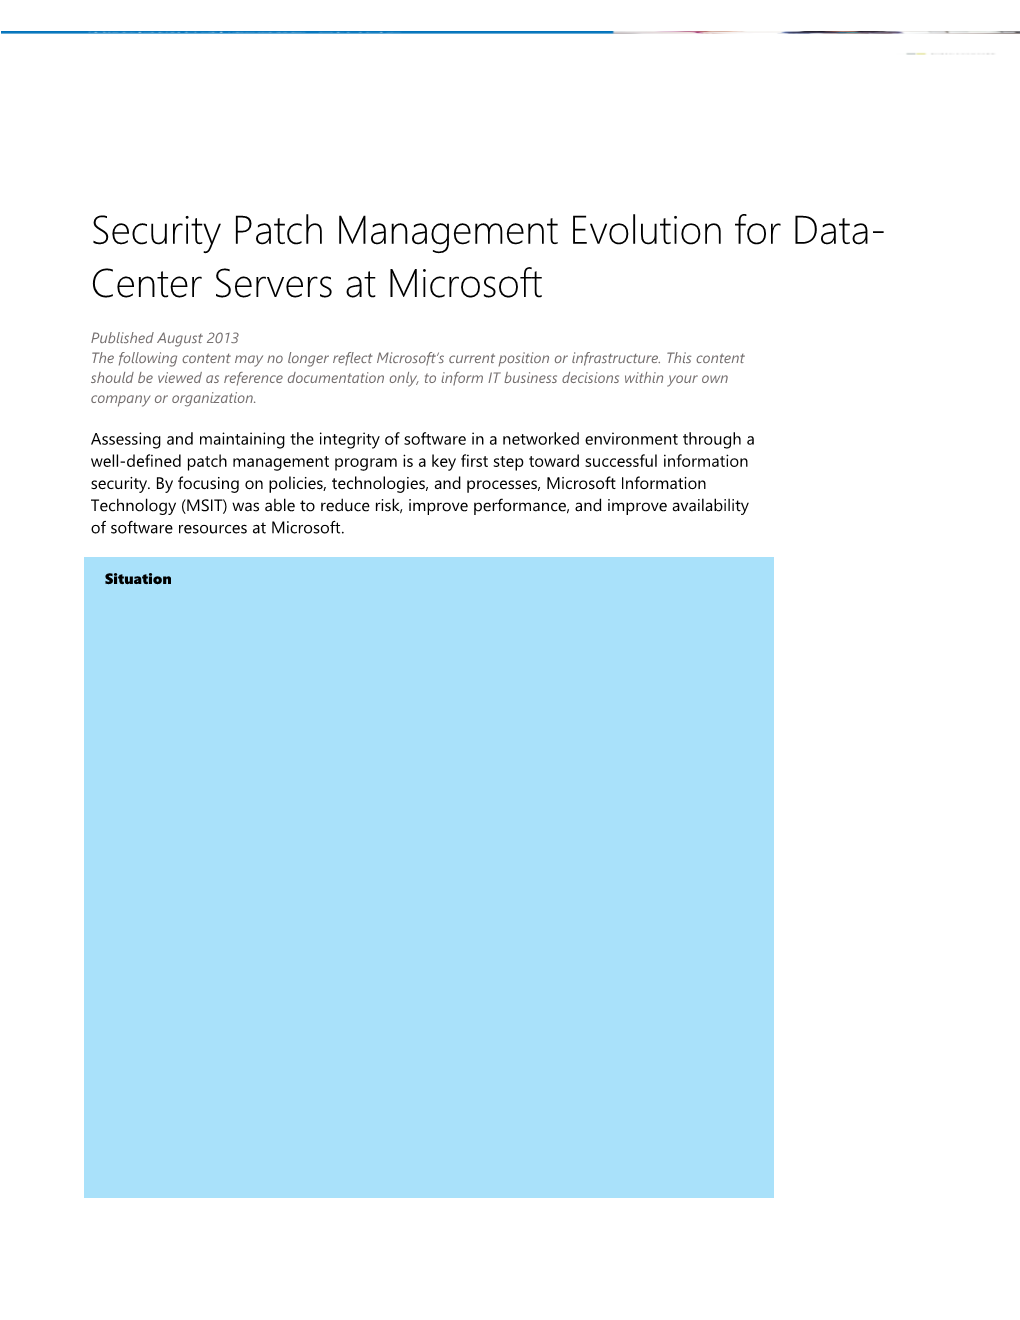 Security Patch Magagement Evolution for Data-Center Servers at Microsoft